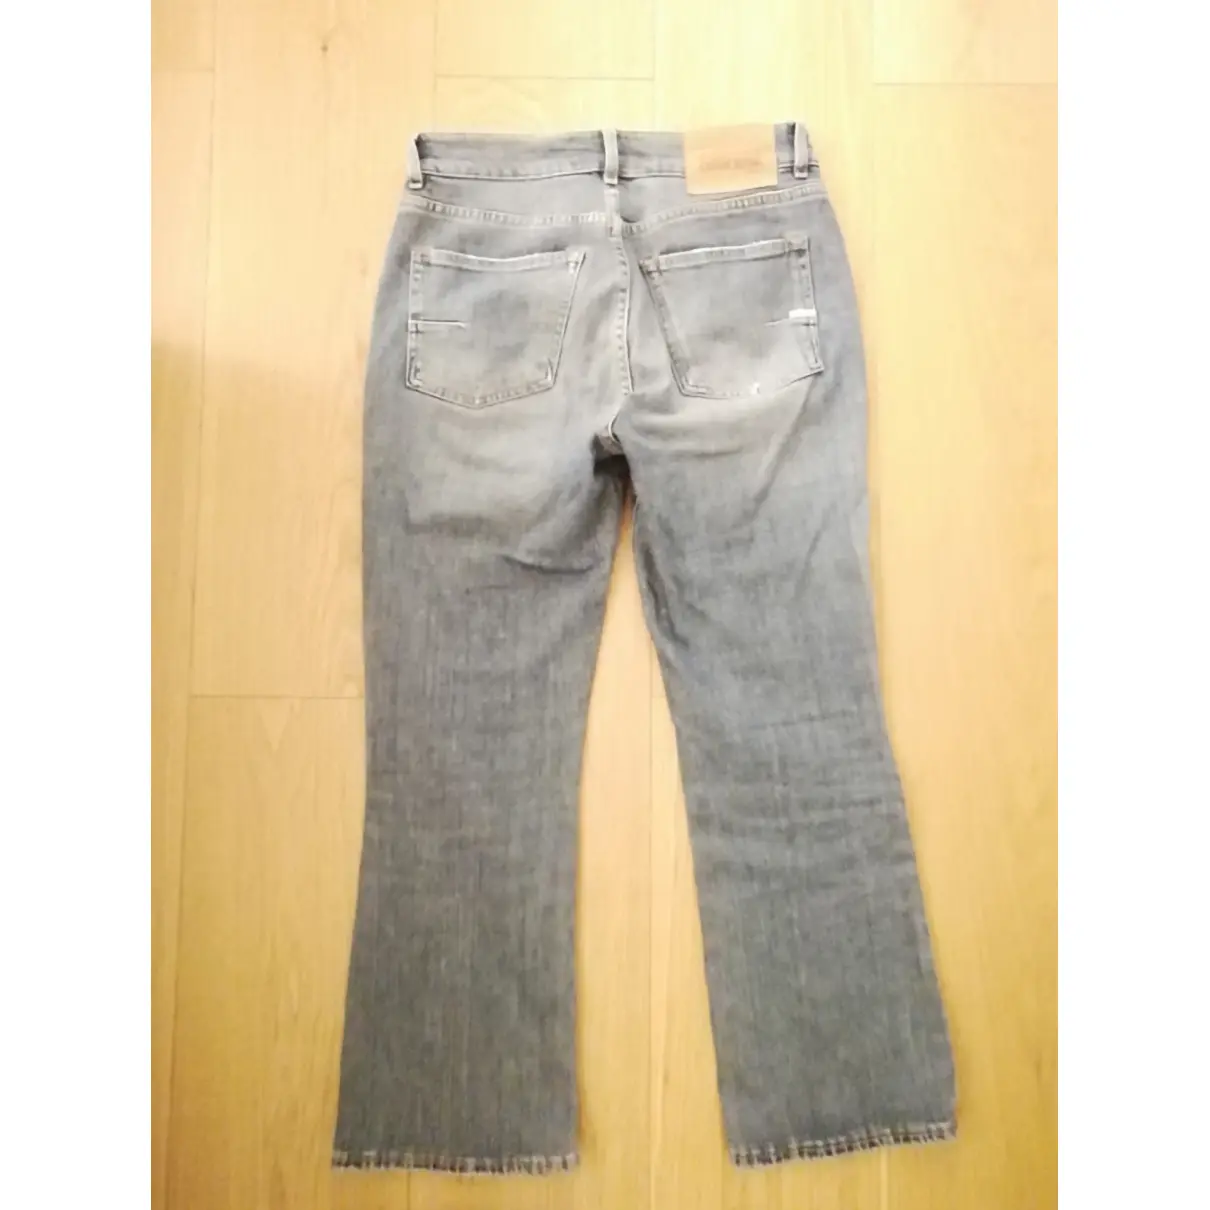 Buy Mauro Grifoni Jeans online